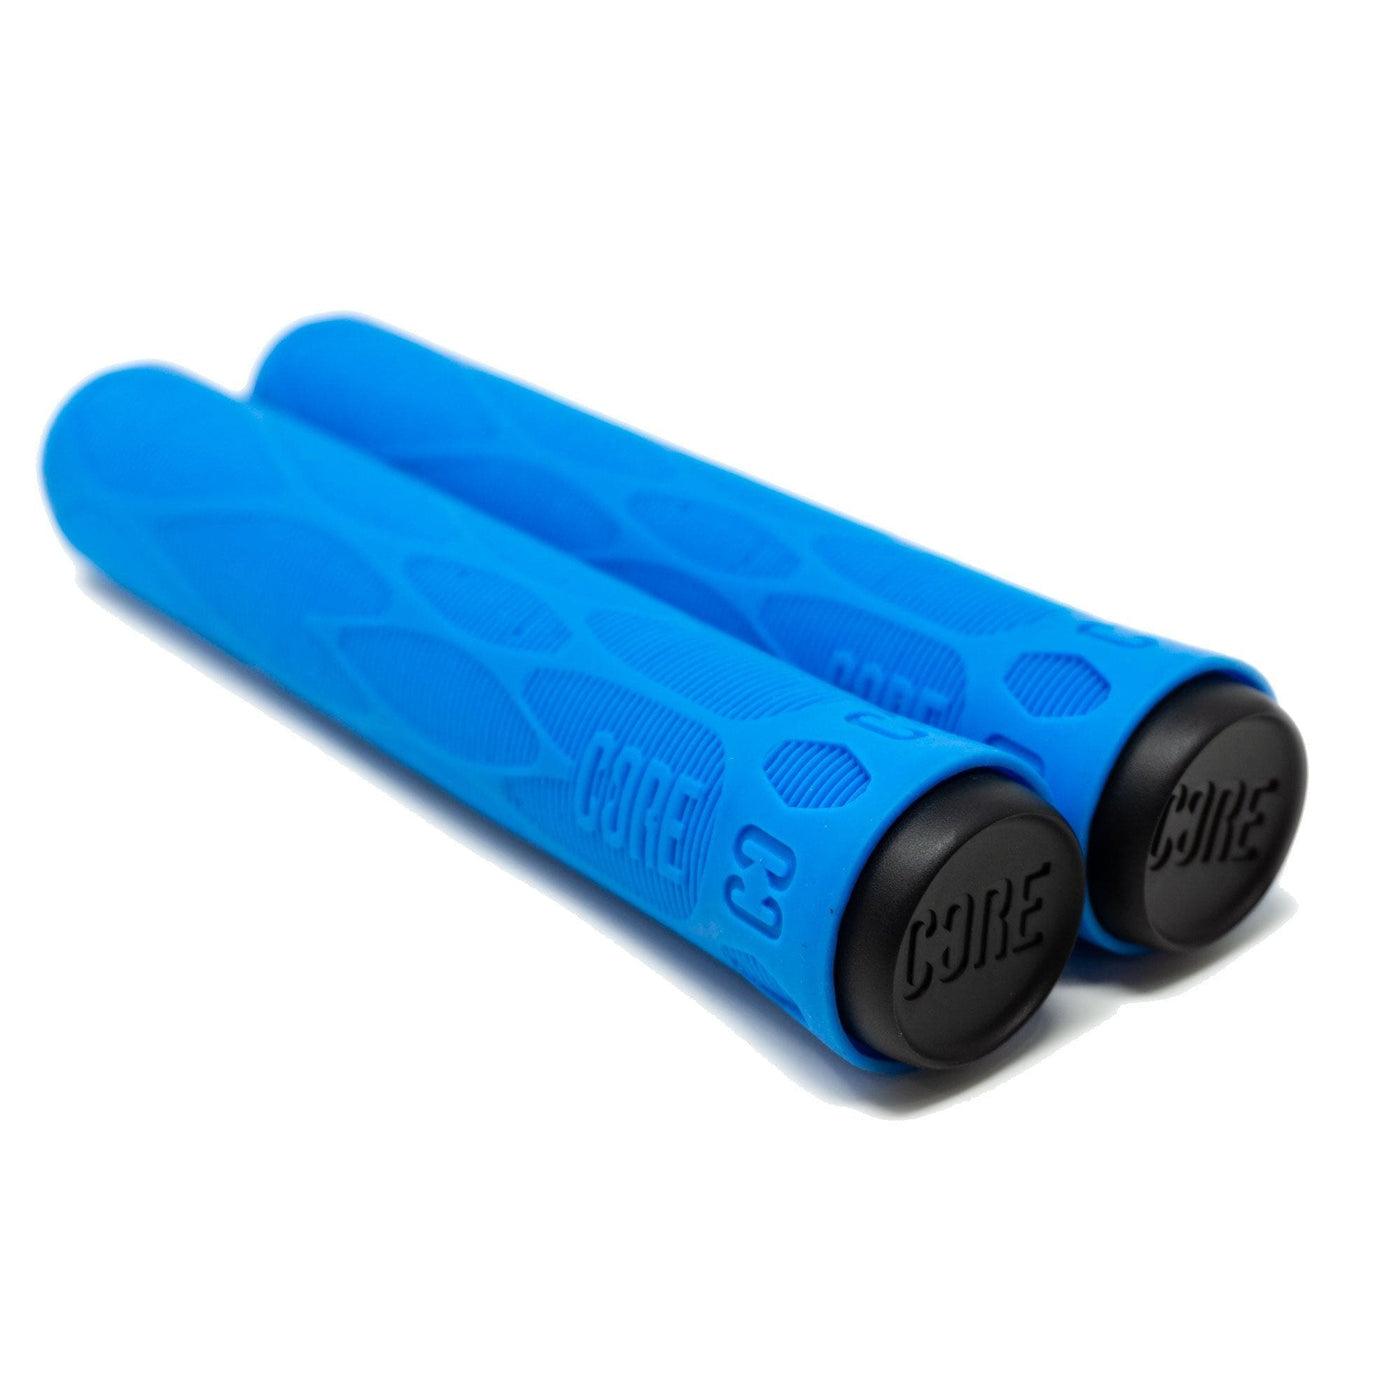 CORE Pro Scooter Handlebar Grips Soft 170mm Blue I Scooter Grips Laying Down